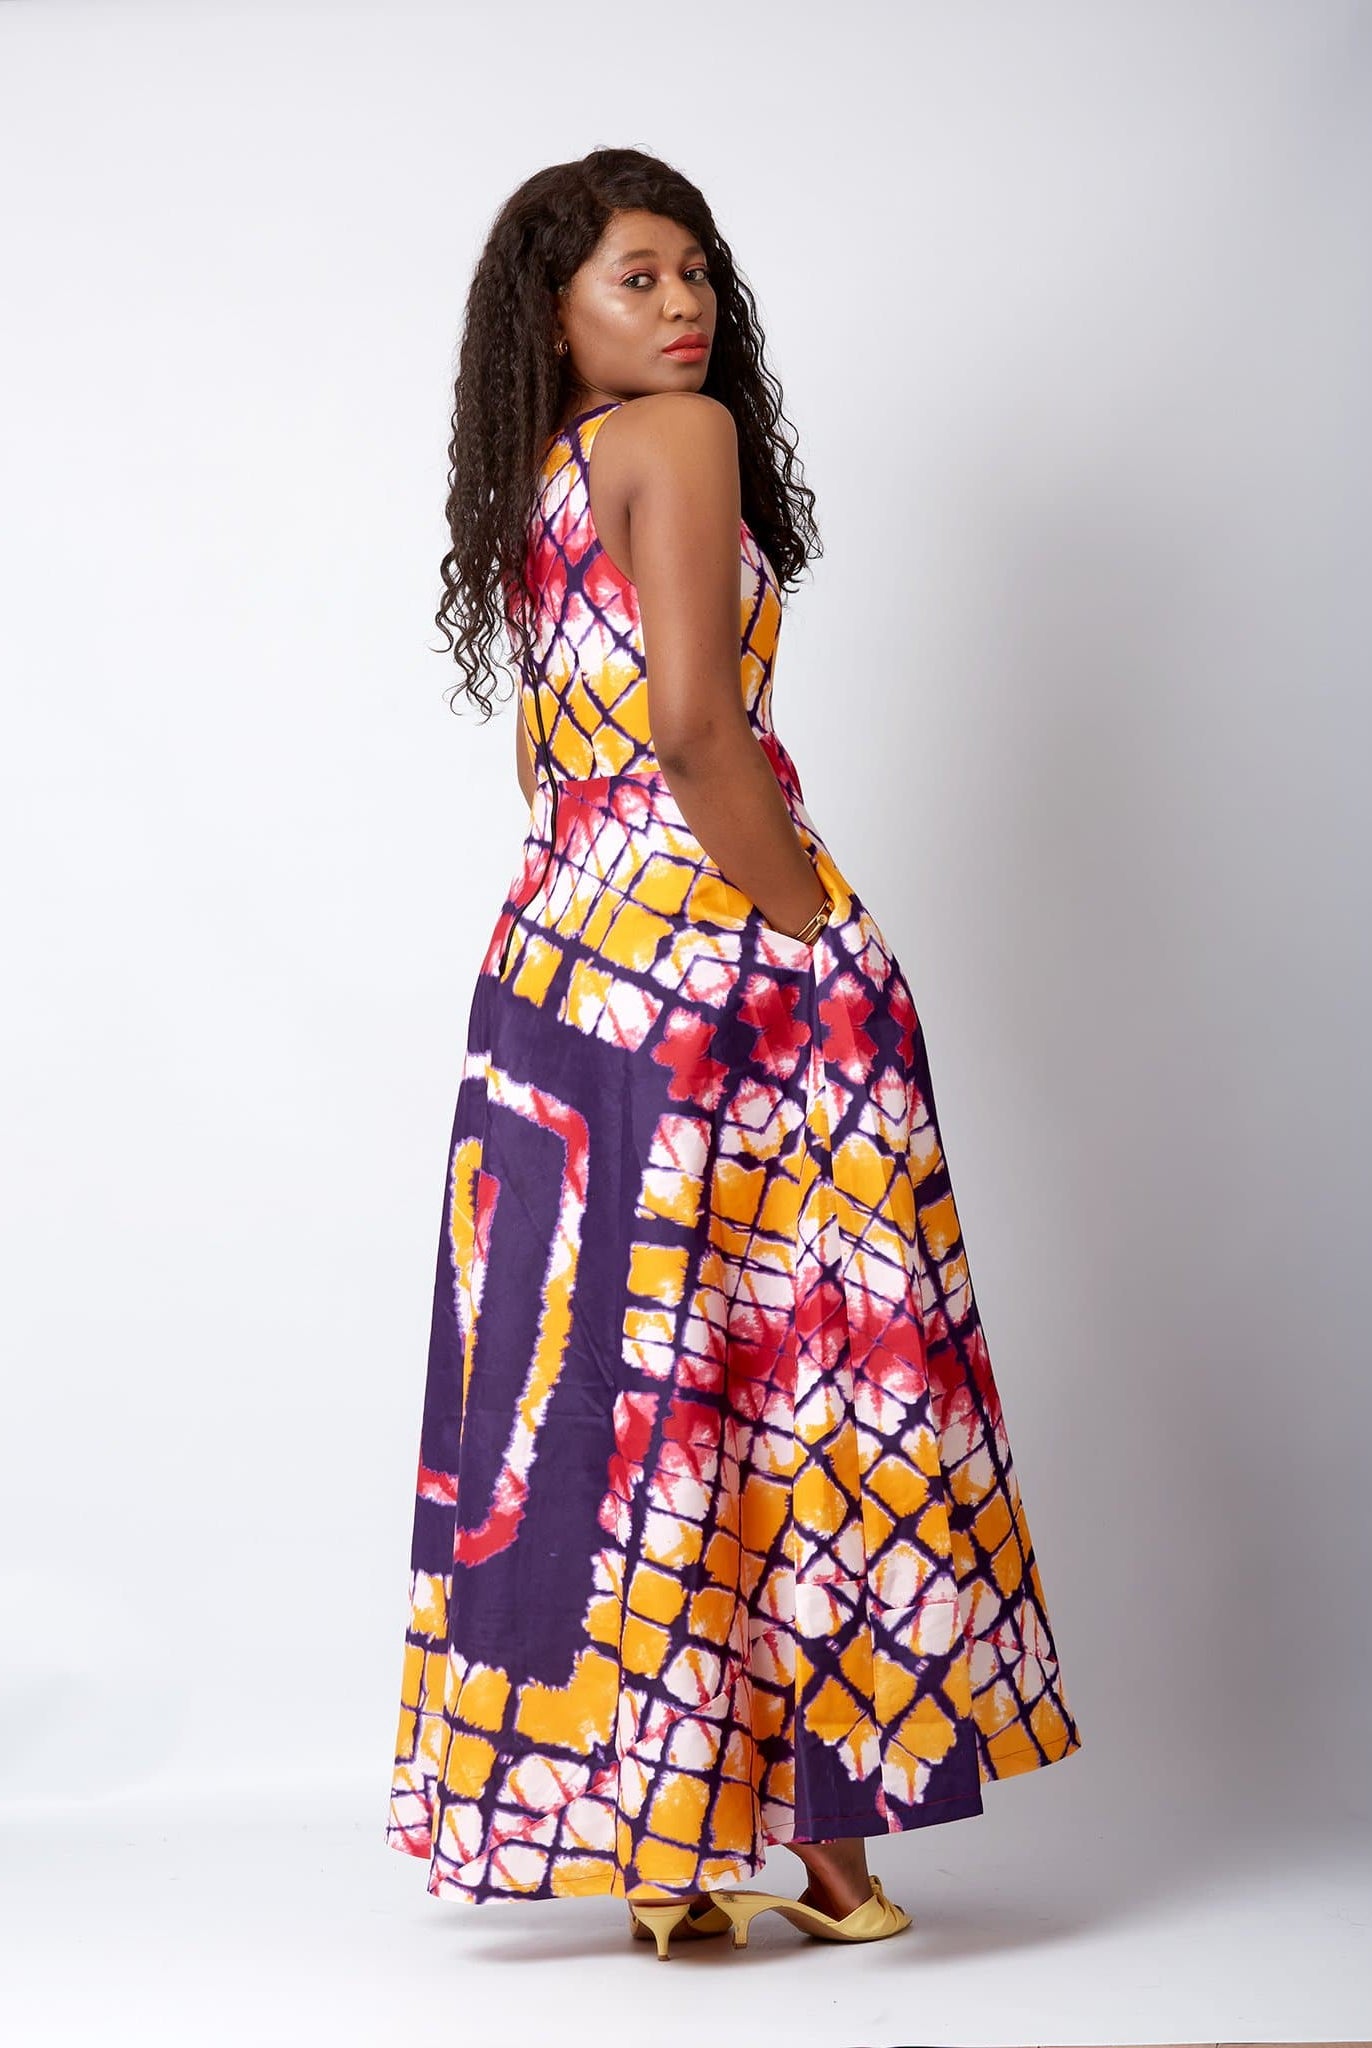 African print dresses perfect summer fashion , Mixed Floral summer outfits | African dresses, Long African print gown, African print Maxi dresses, Floral Summer Dresses | African party dress | Black owned UK fashion brand | African clothing store | Ready to wear African clothing | African print maxi dress | African Kampala dress | Kampala dress | Kitenge dress | Sleeveless Maxi African dress  | Online African Clothing Store